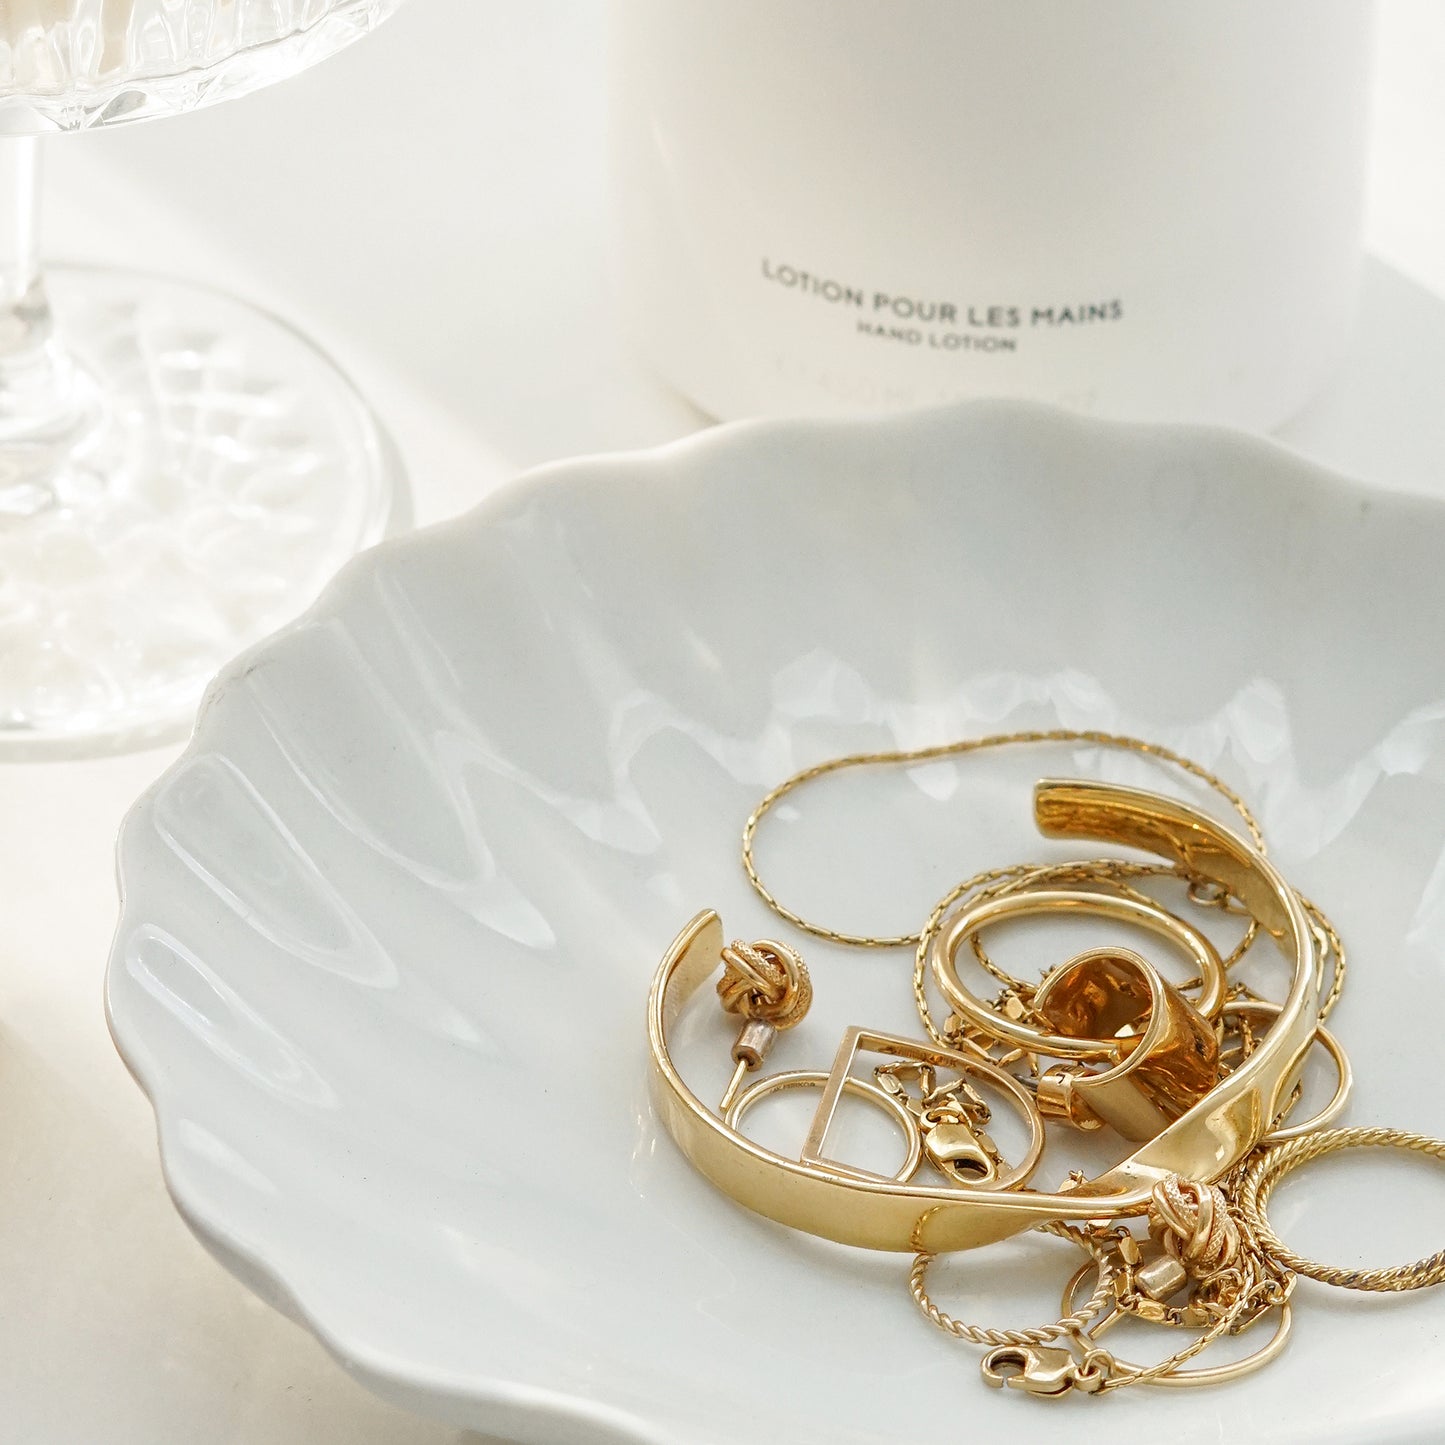 coupe glass, Byredo body lotion, and gold bracelet, earrings, and rings on ceramic shell tray